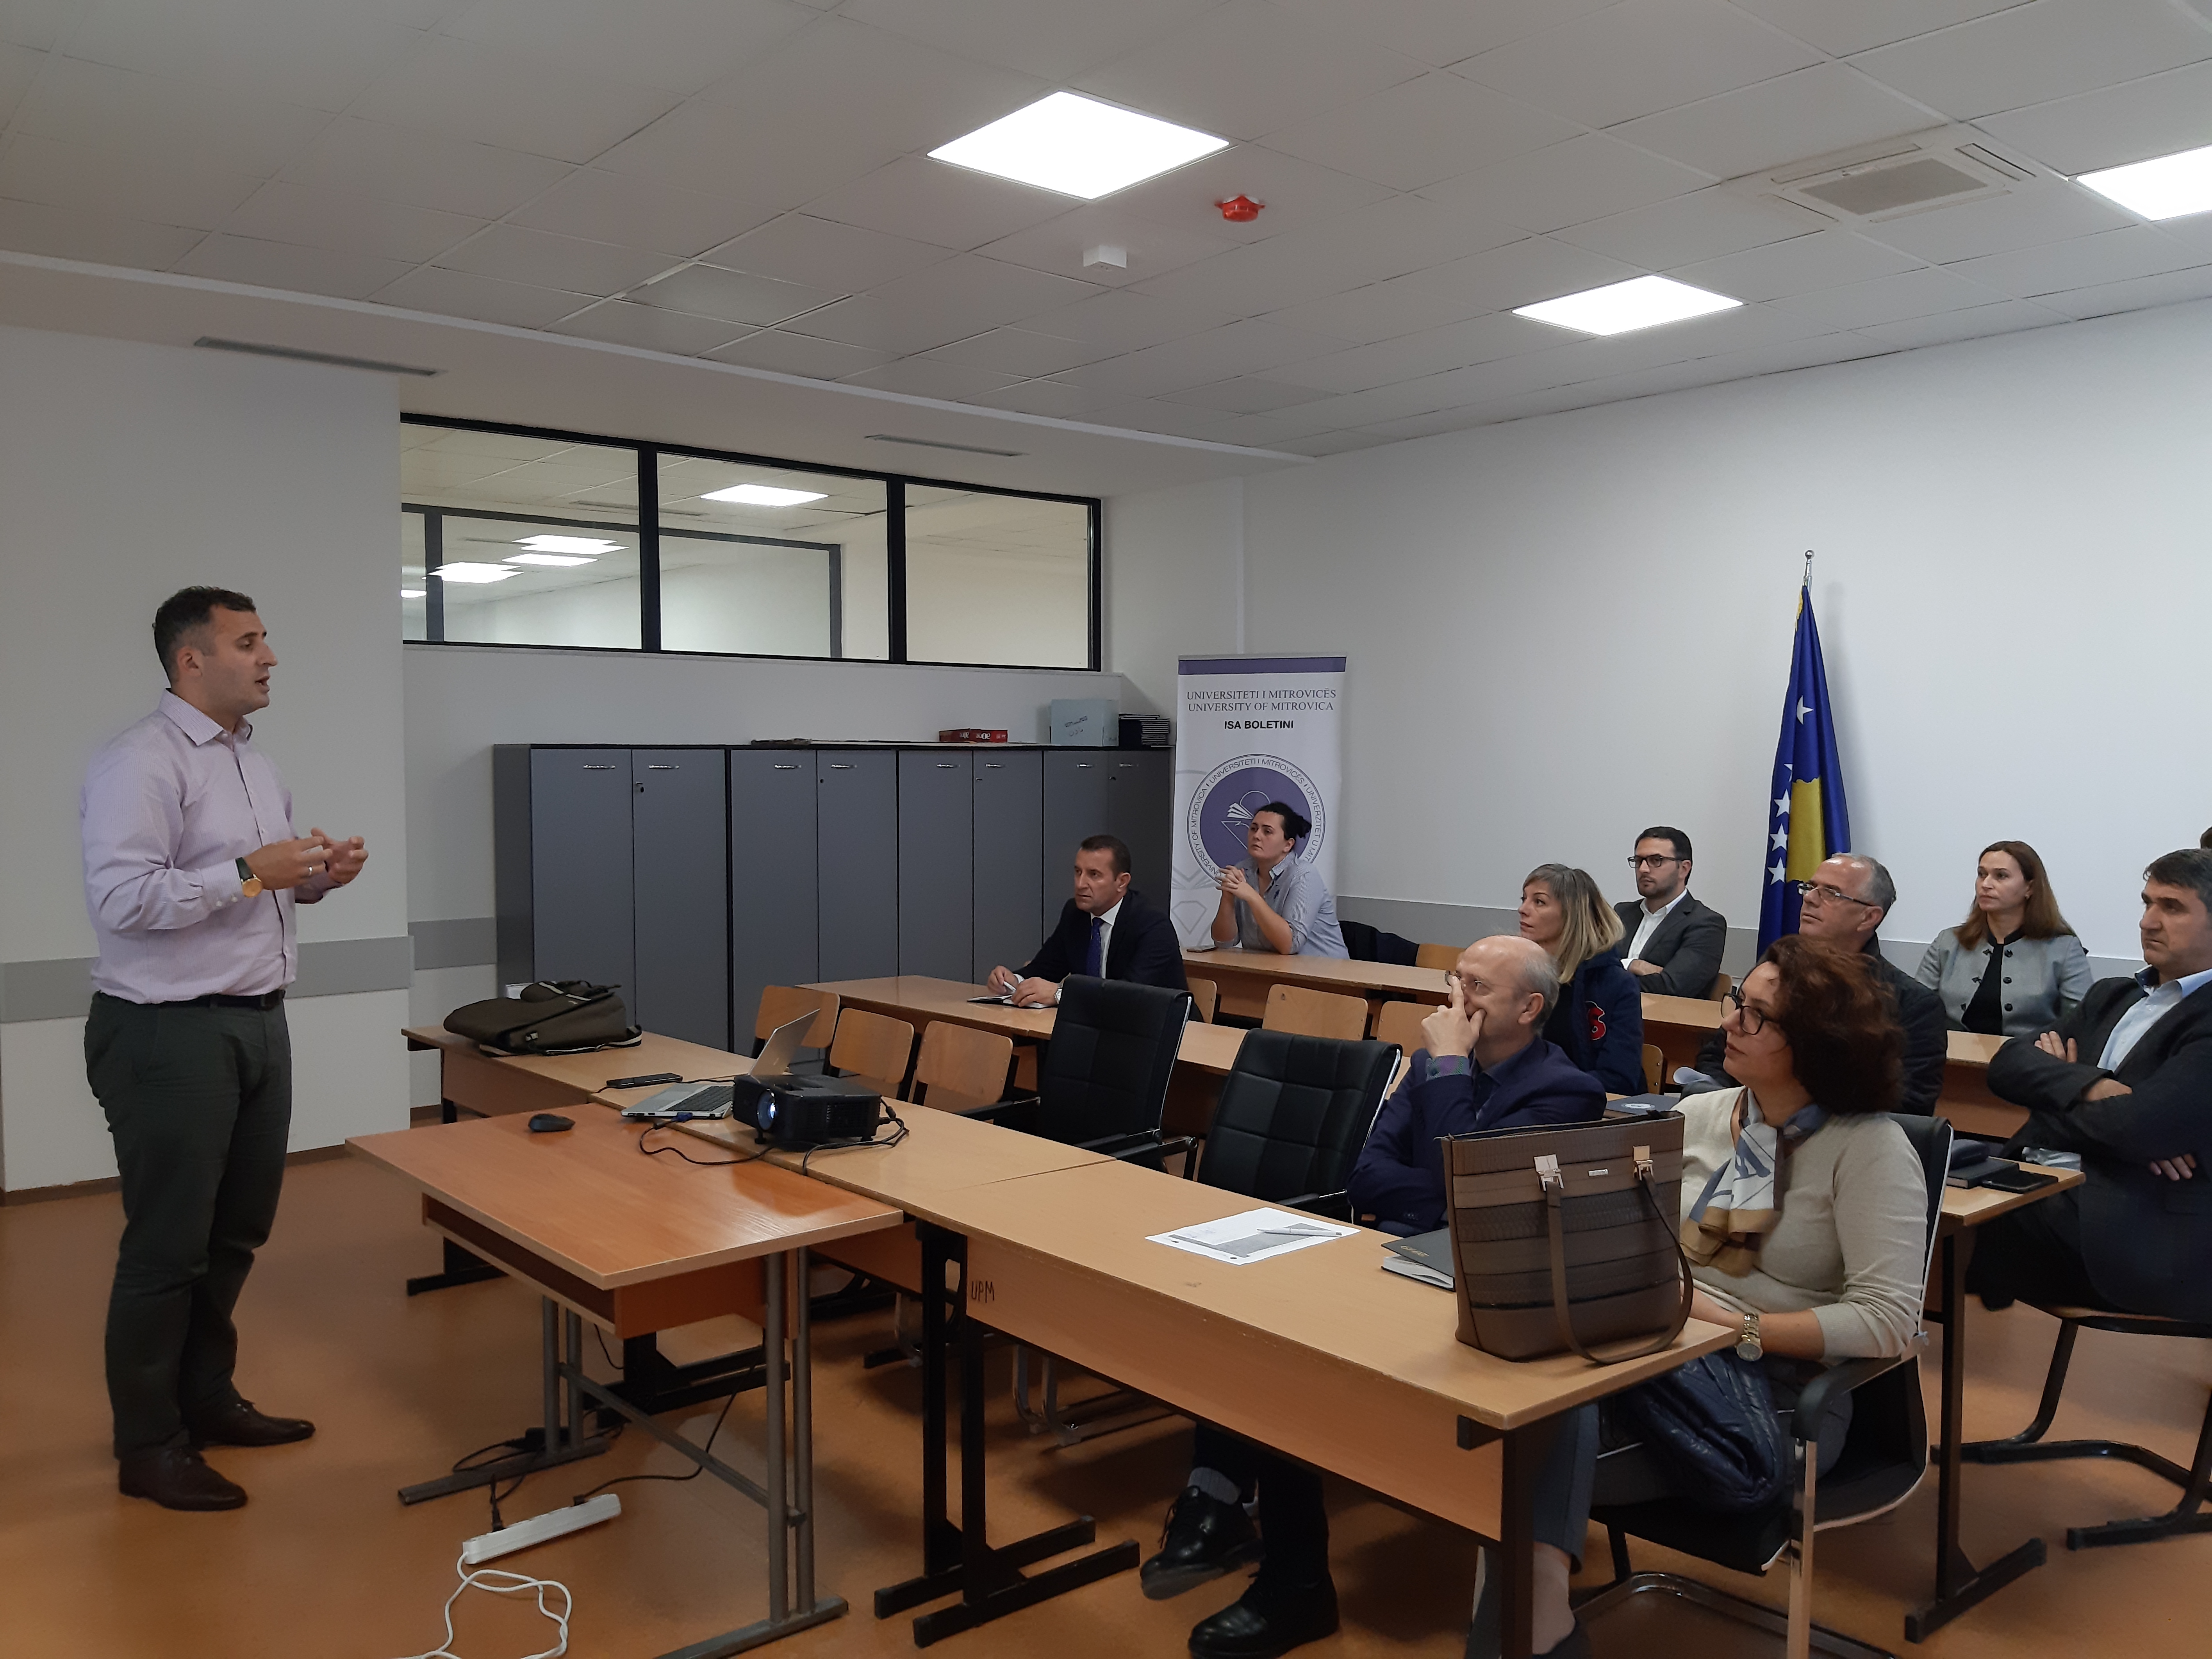 An Informational Session On The Internationalization Of The University Was Held In UMIB